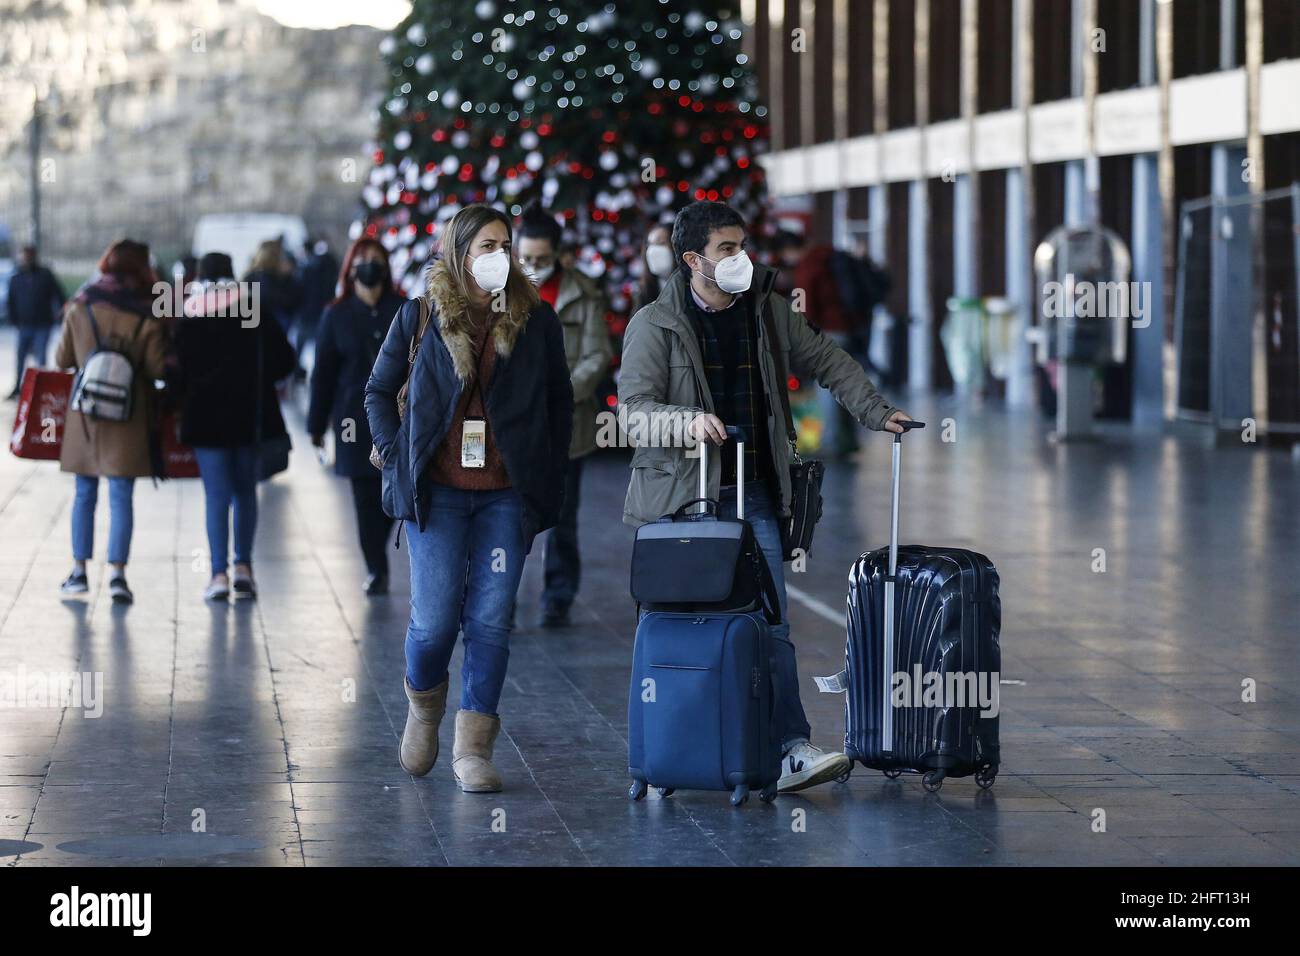 Cecilia Fabiano/LaPresse December 17 , 2020 Roma (Italy) News: Travel for Christmas time In the Pic : The passengers passing near the Christmas tree in front of Termini Station Stock Photo